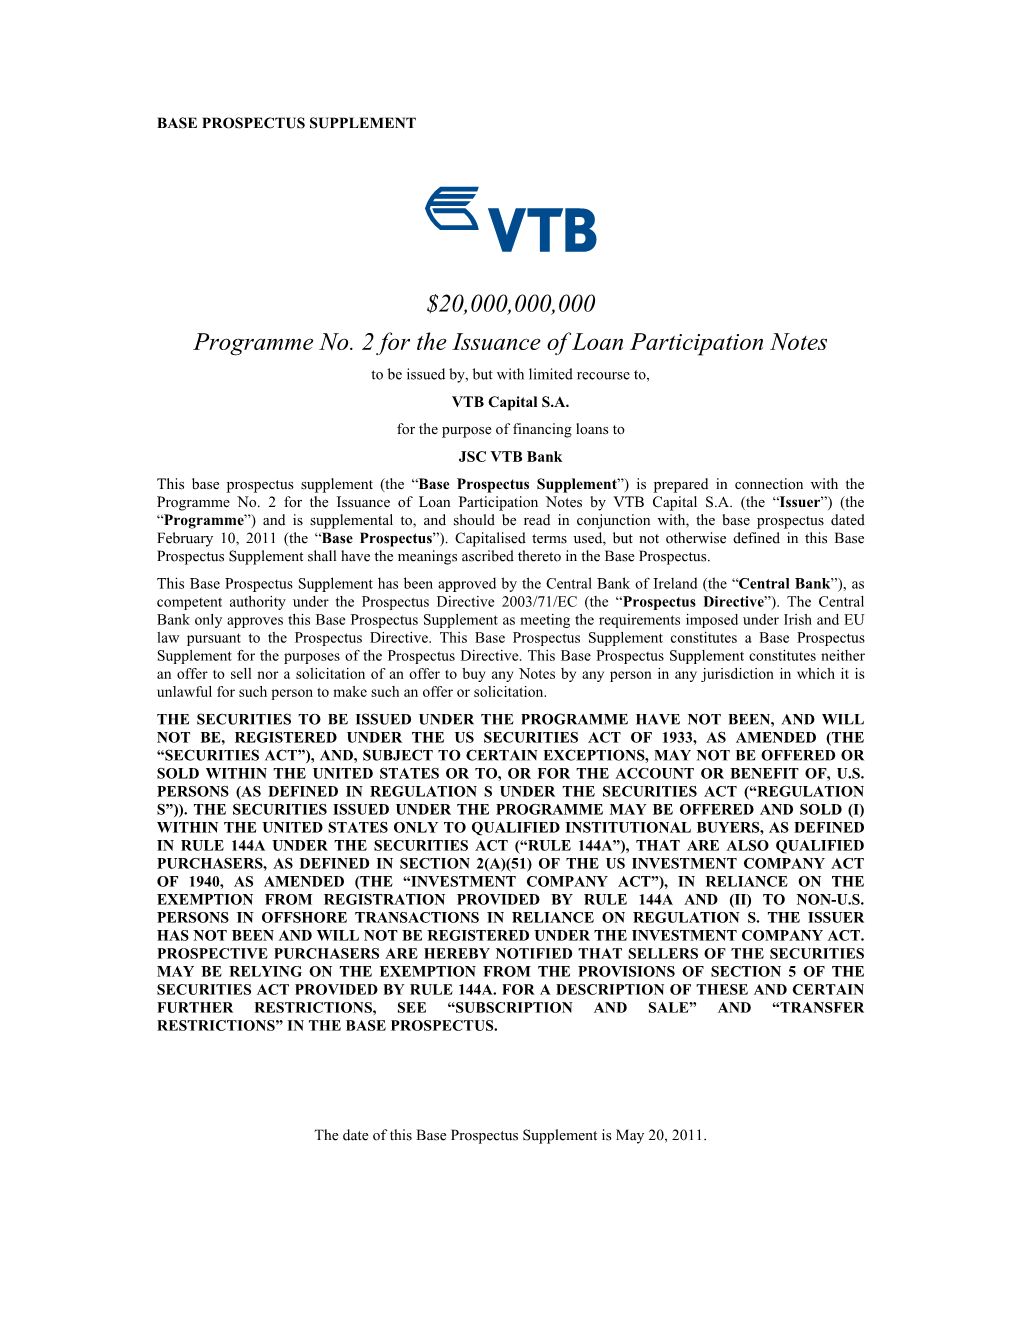 $20,000,000,000 Programme No. 2 for the Issuance of Loan Participation Notes to Be Issued By, but with Limited Recourse To, VTB Capital S.A